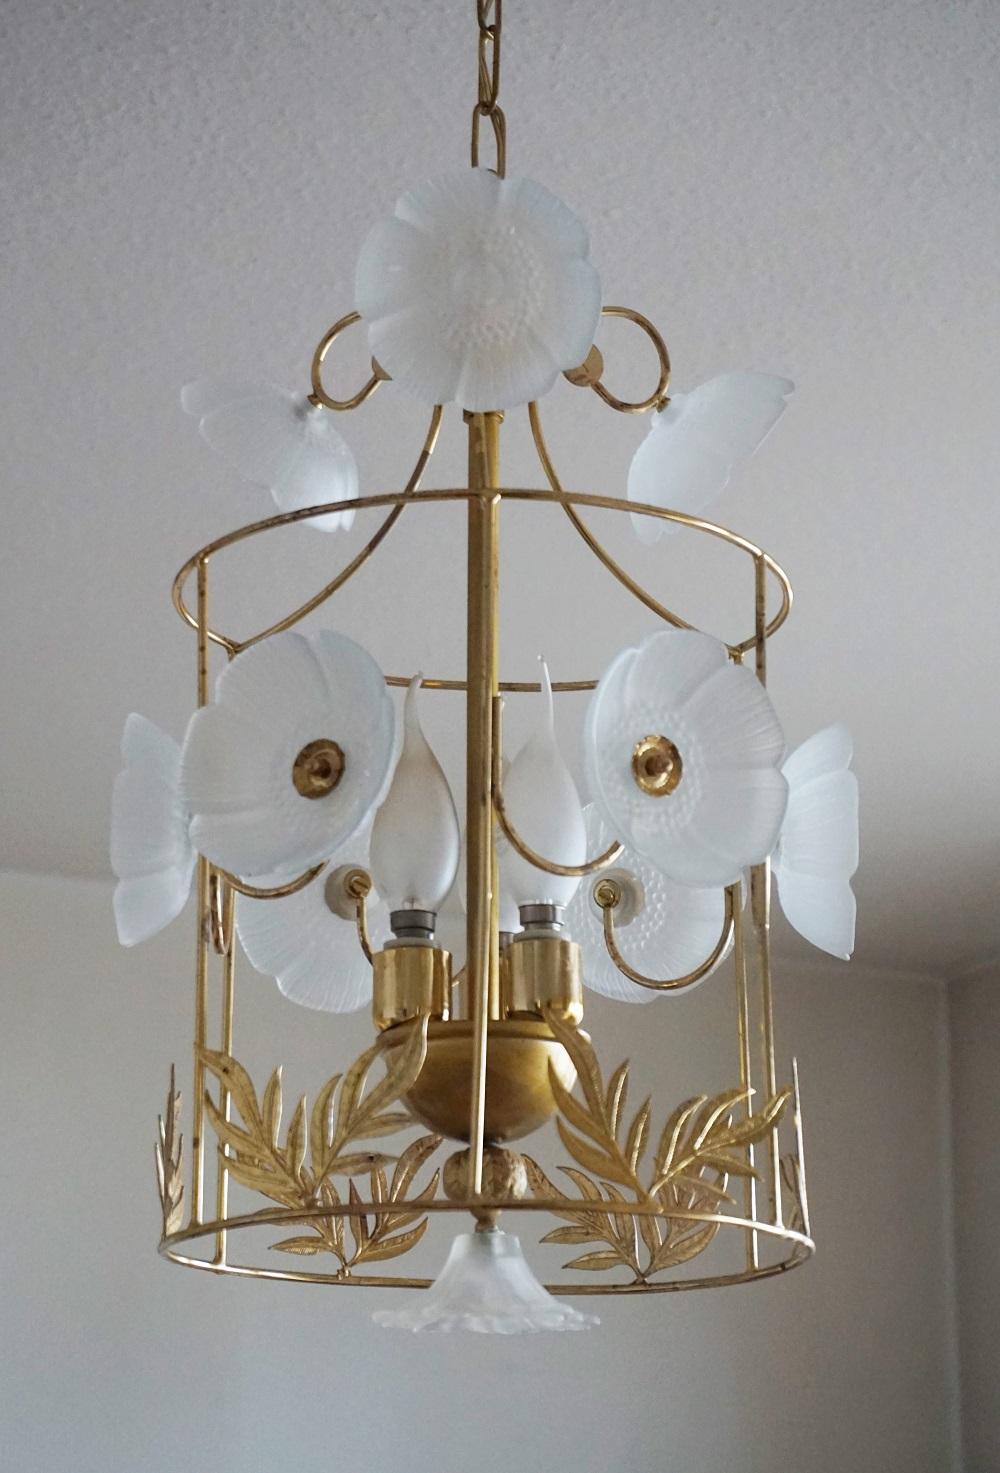 A lovely brass cylinder lantern decorated with beautiful frosted glass flowers, integrated central three candelabra light bulb holder.
In good condition, brass with some wear, rewired.
Measures:
Overall height 33.50